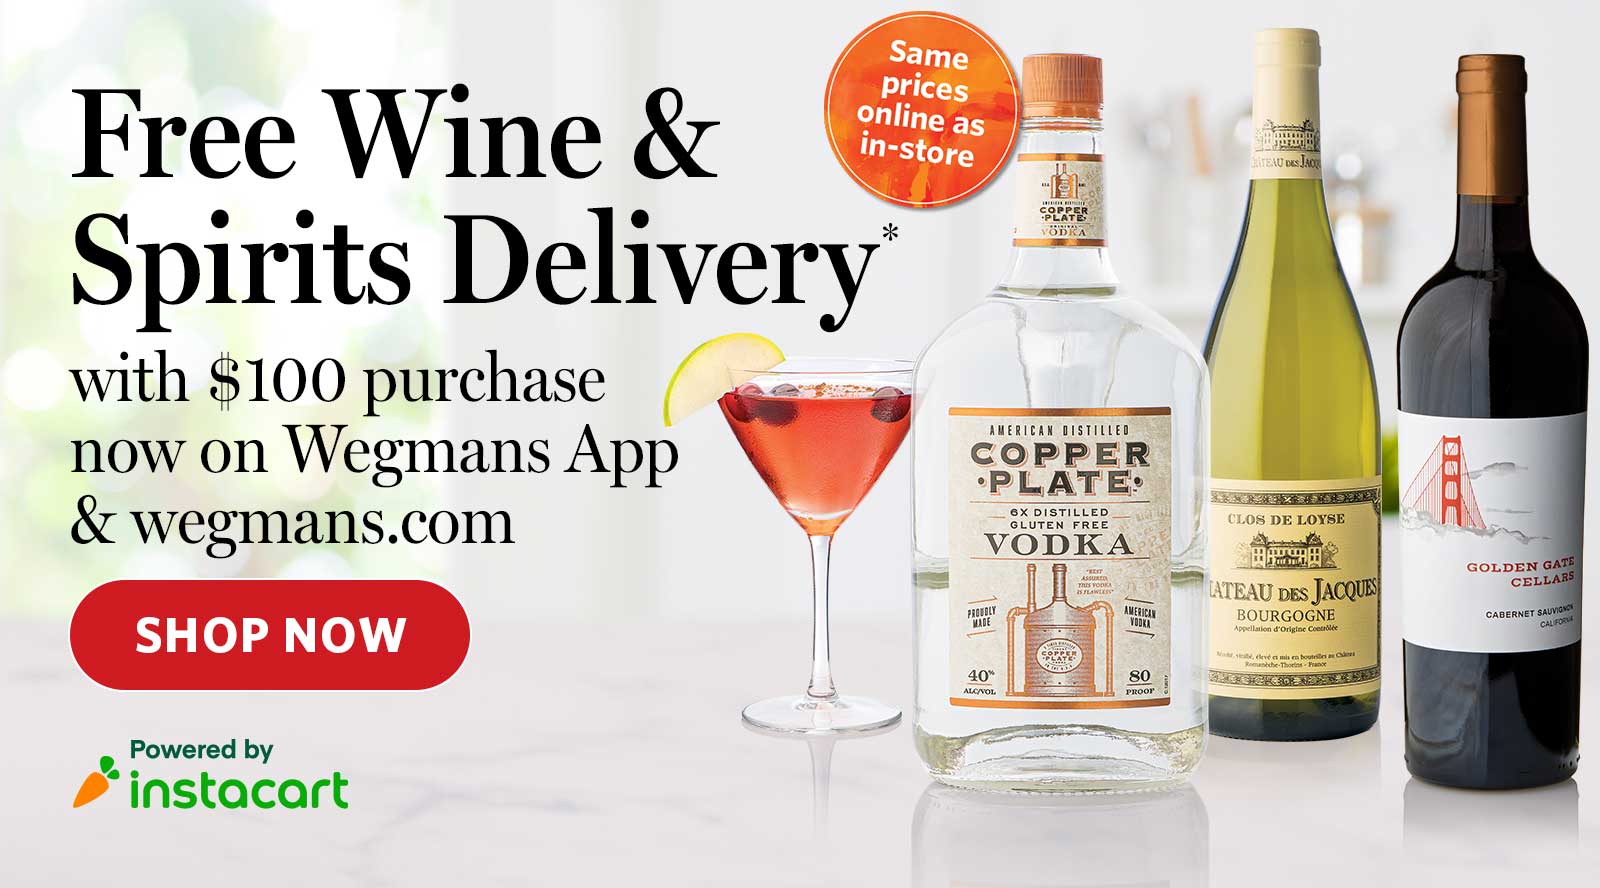 Free Wine and Spirits Delivery - Shop Now